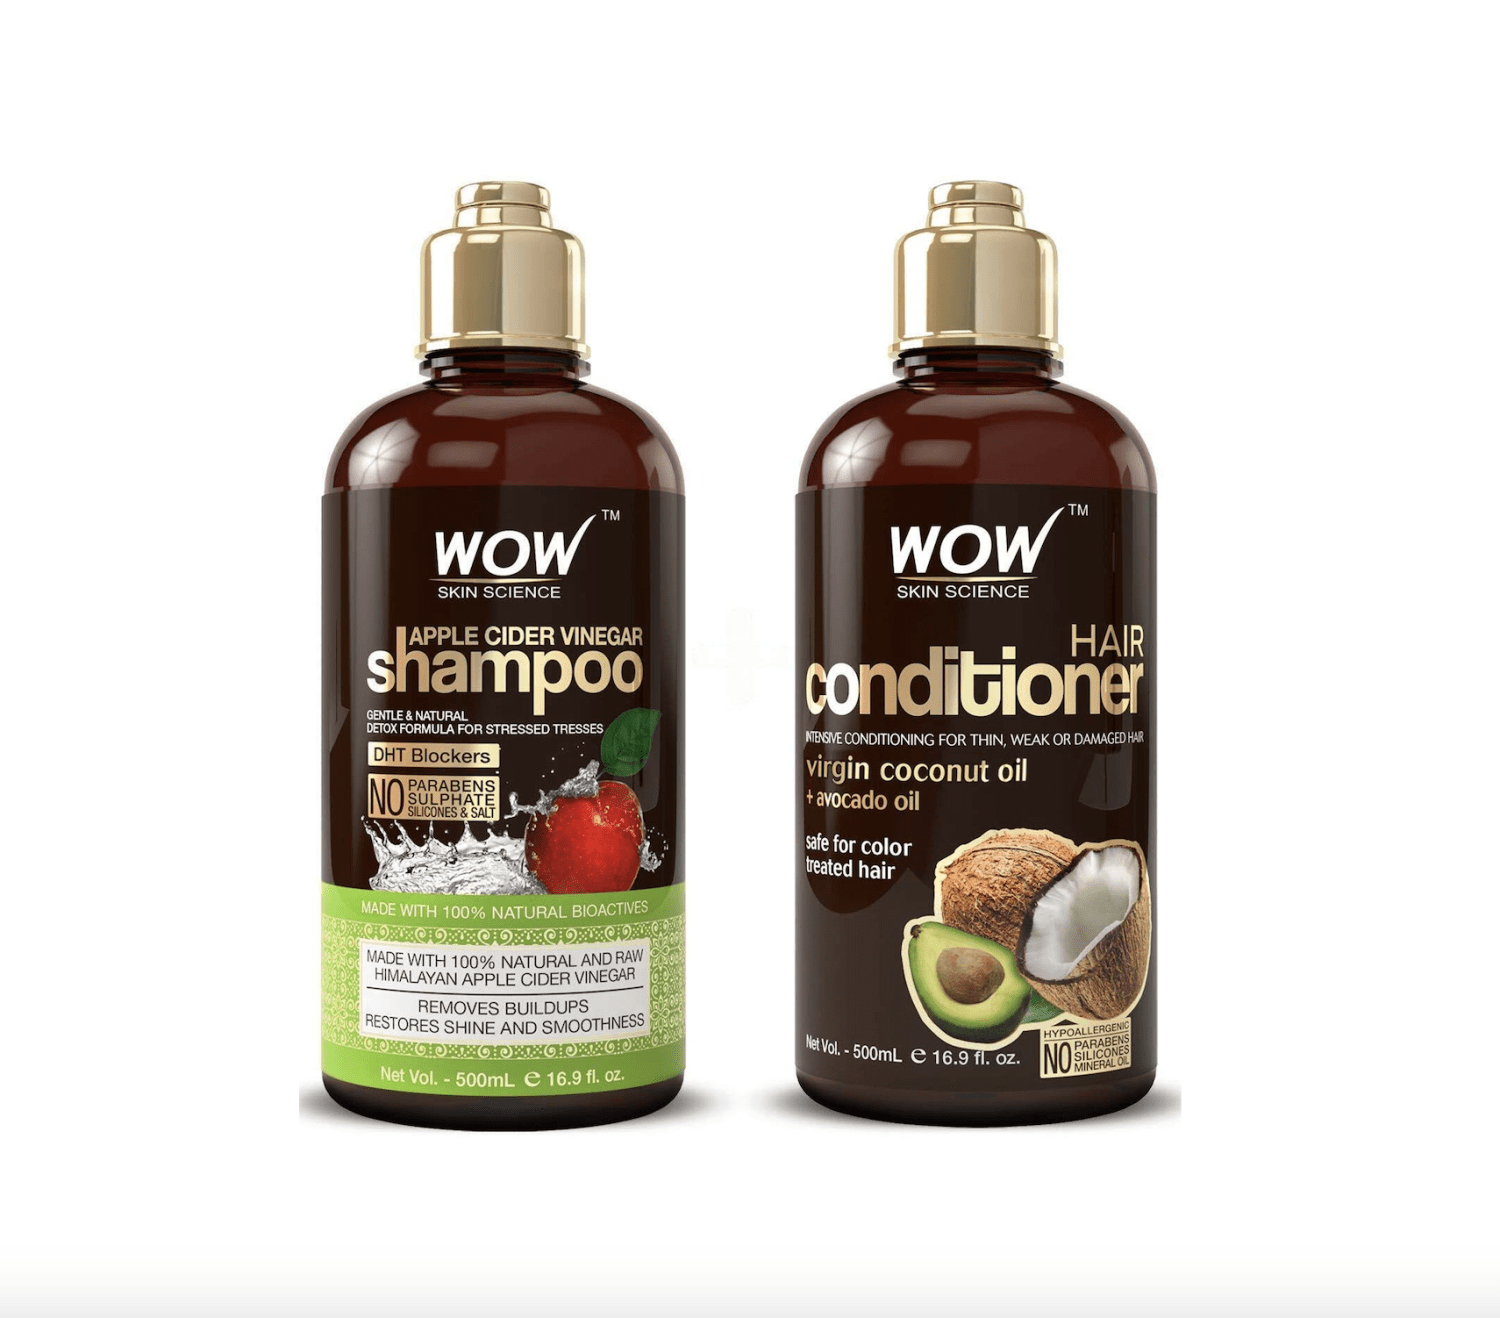 Wow Skin Science apple cider vinegar shampoo is expert-approved